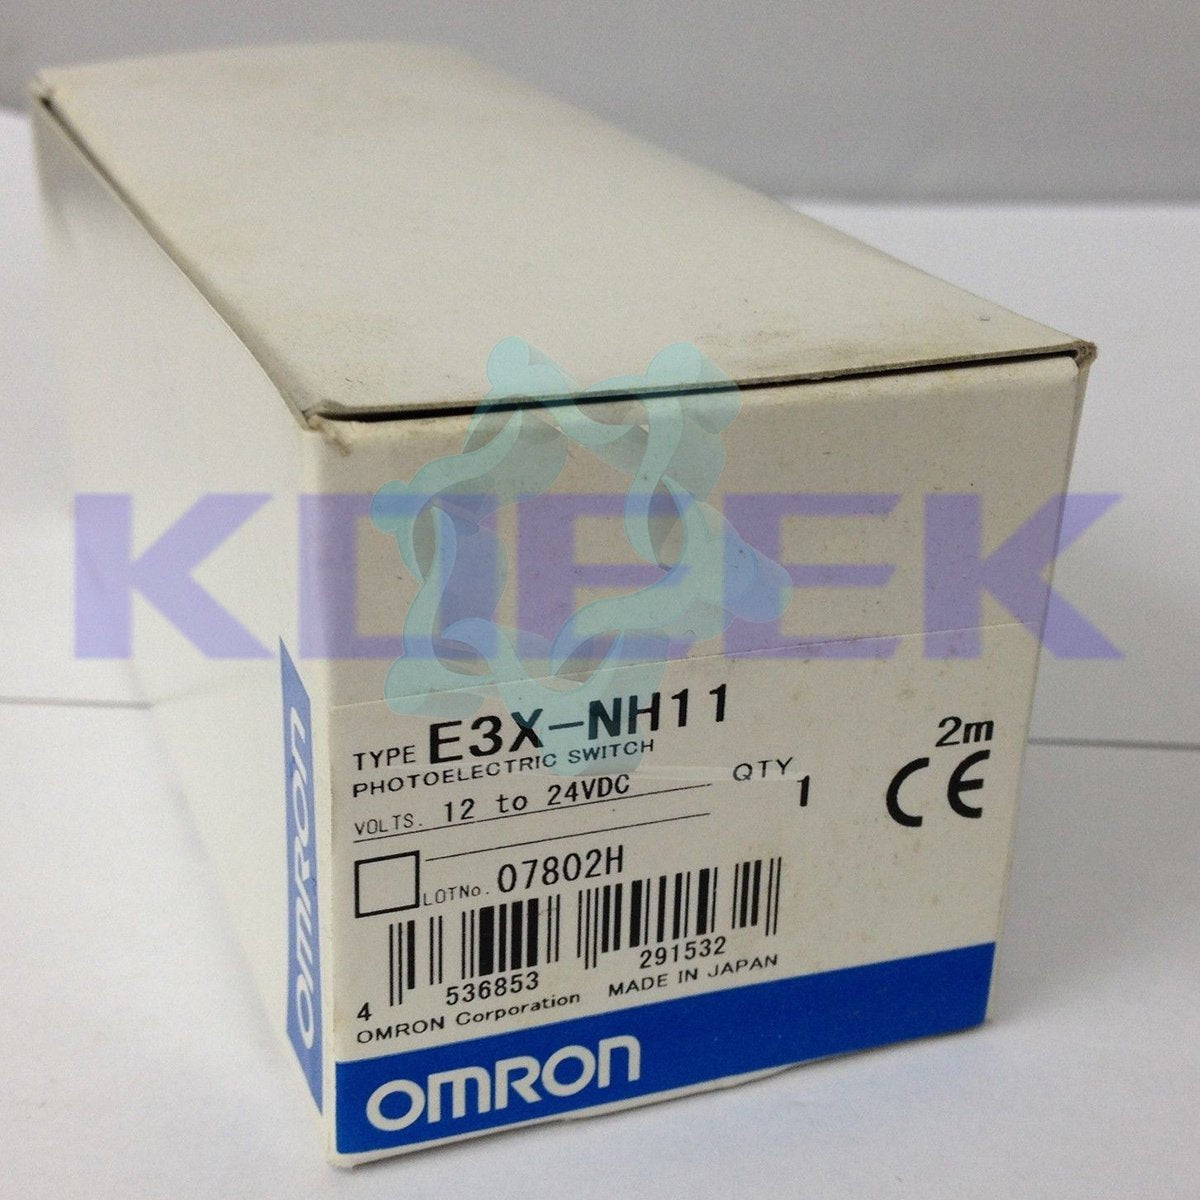 E3X-NH11 KOEED 101-200, 80%, import_2020_10_10_031751, Omron, Other